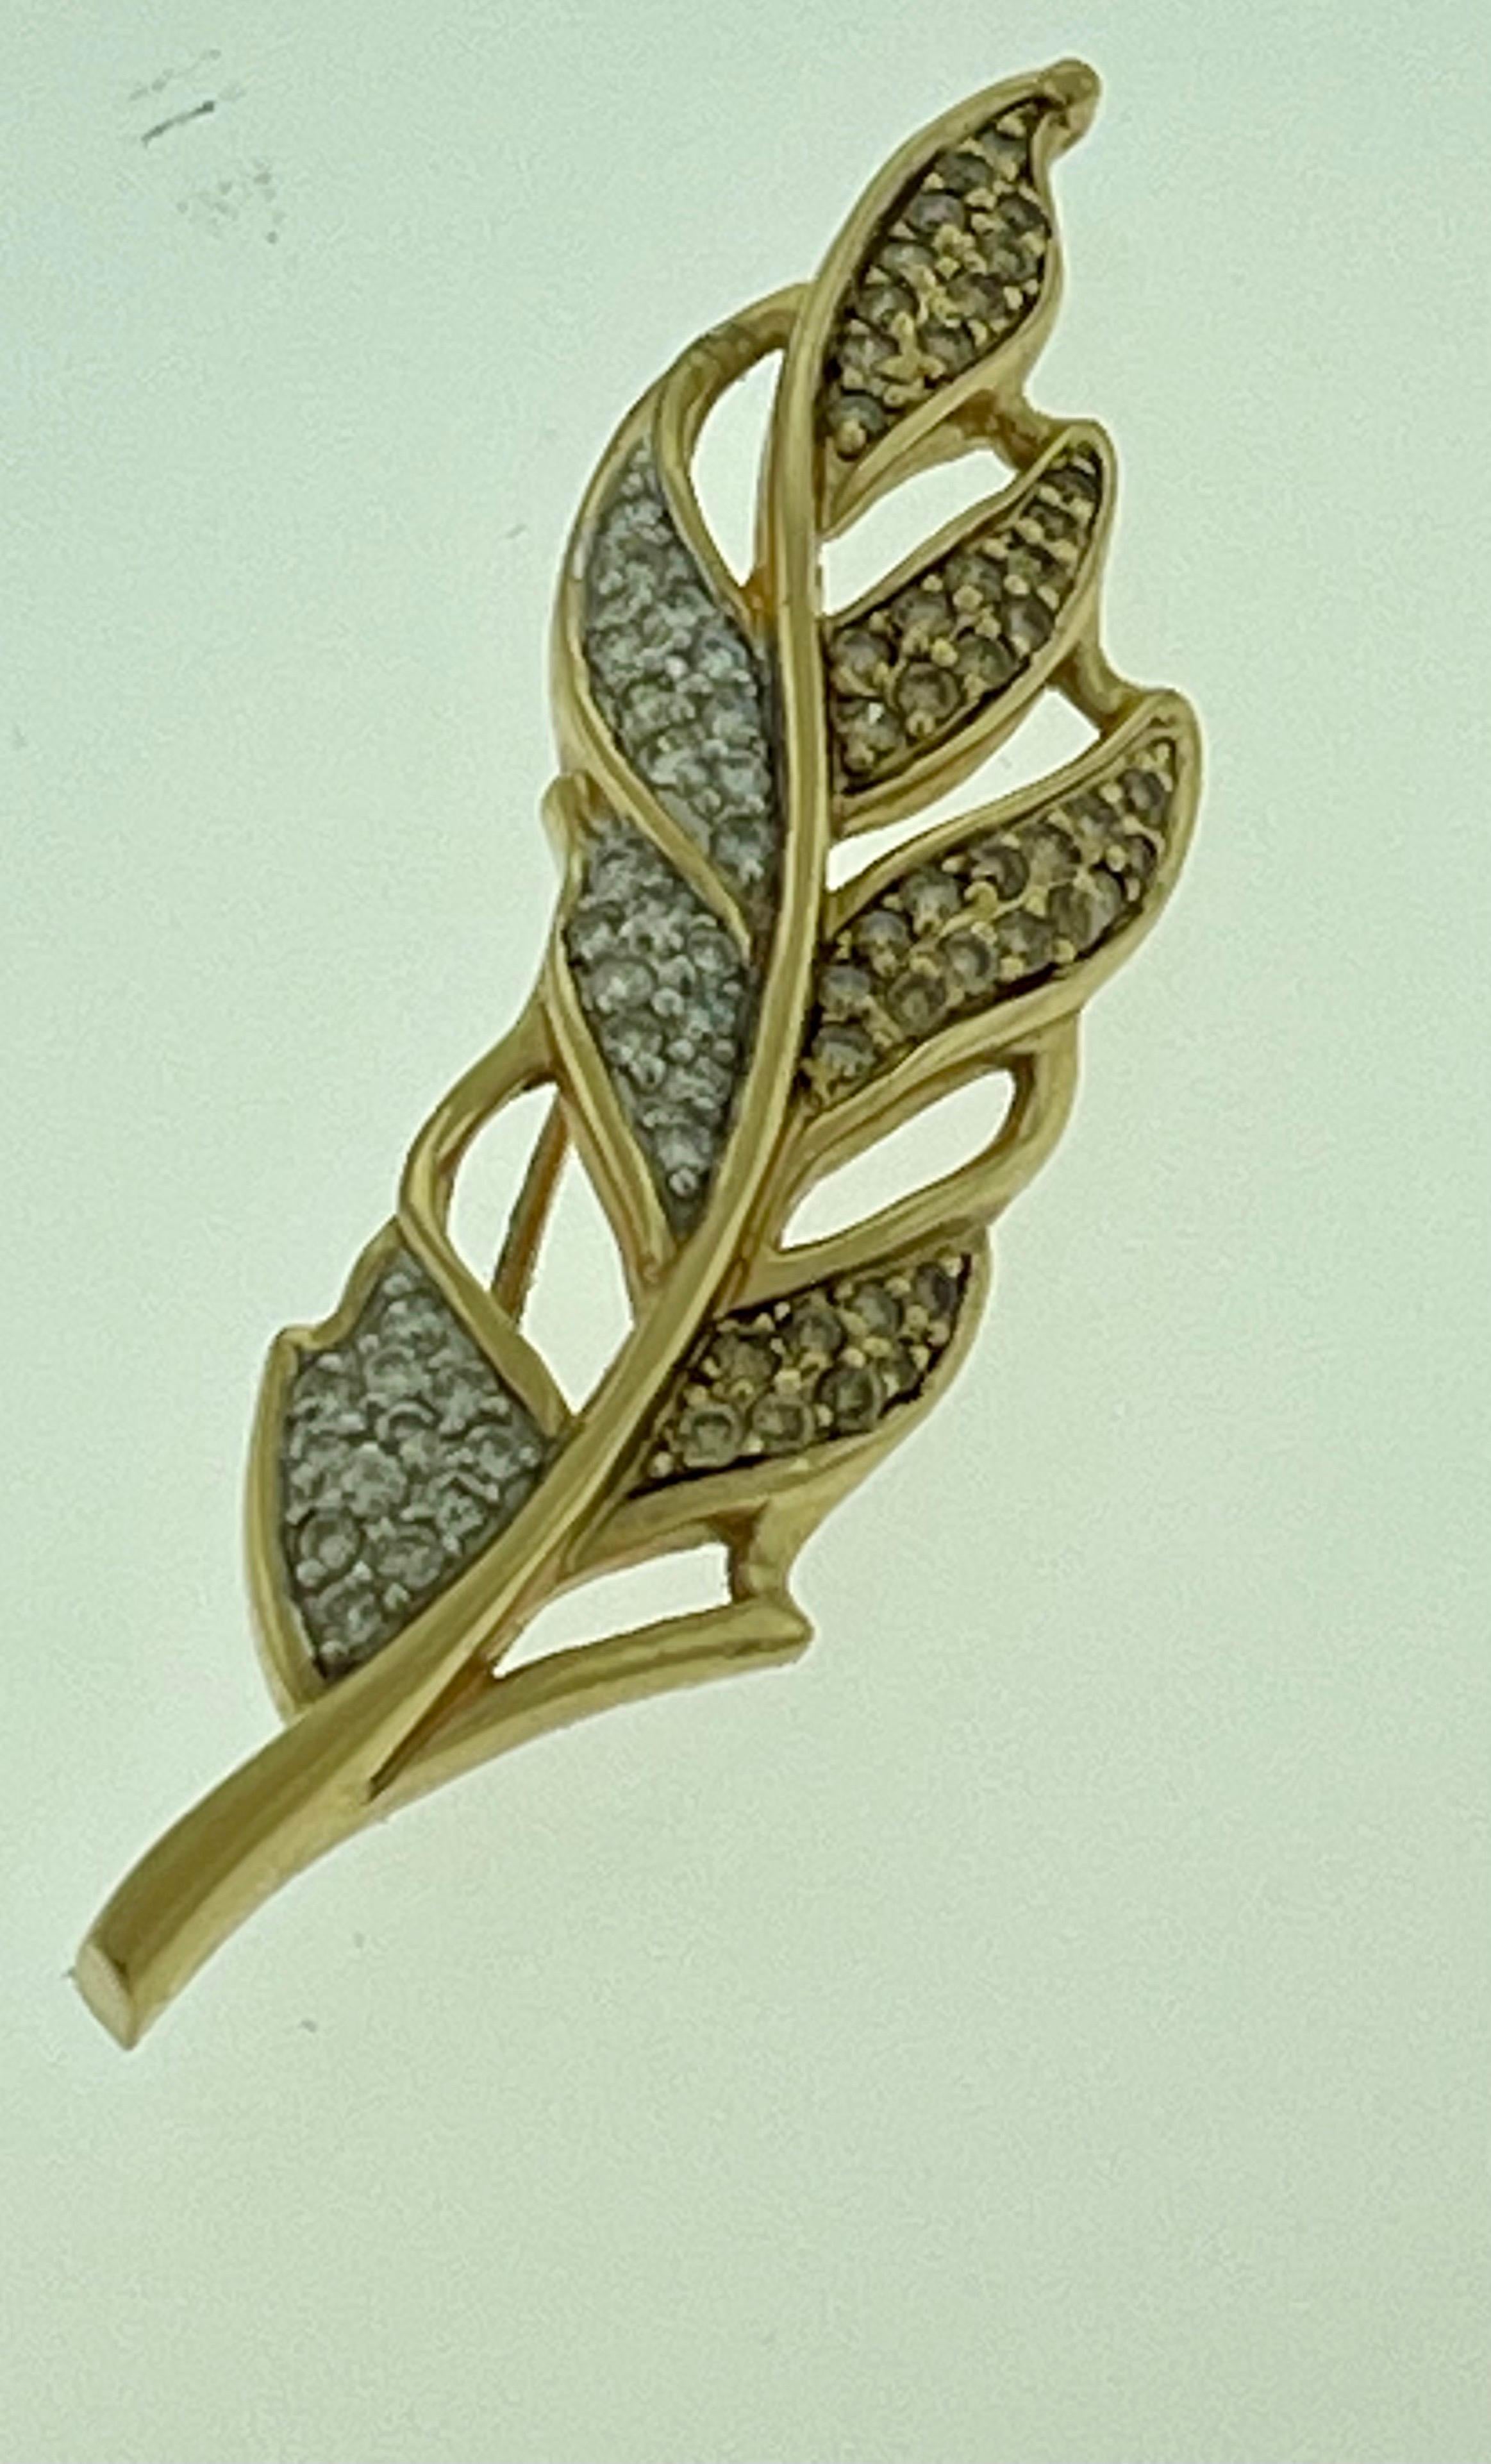 0.6 Carat Leaf Shaped Diamond 14 Karat Gold Pin or Brooch Affordable, Estate In Excellent Condition For Sale In New York, NY